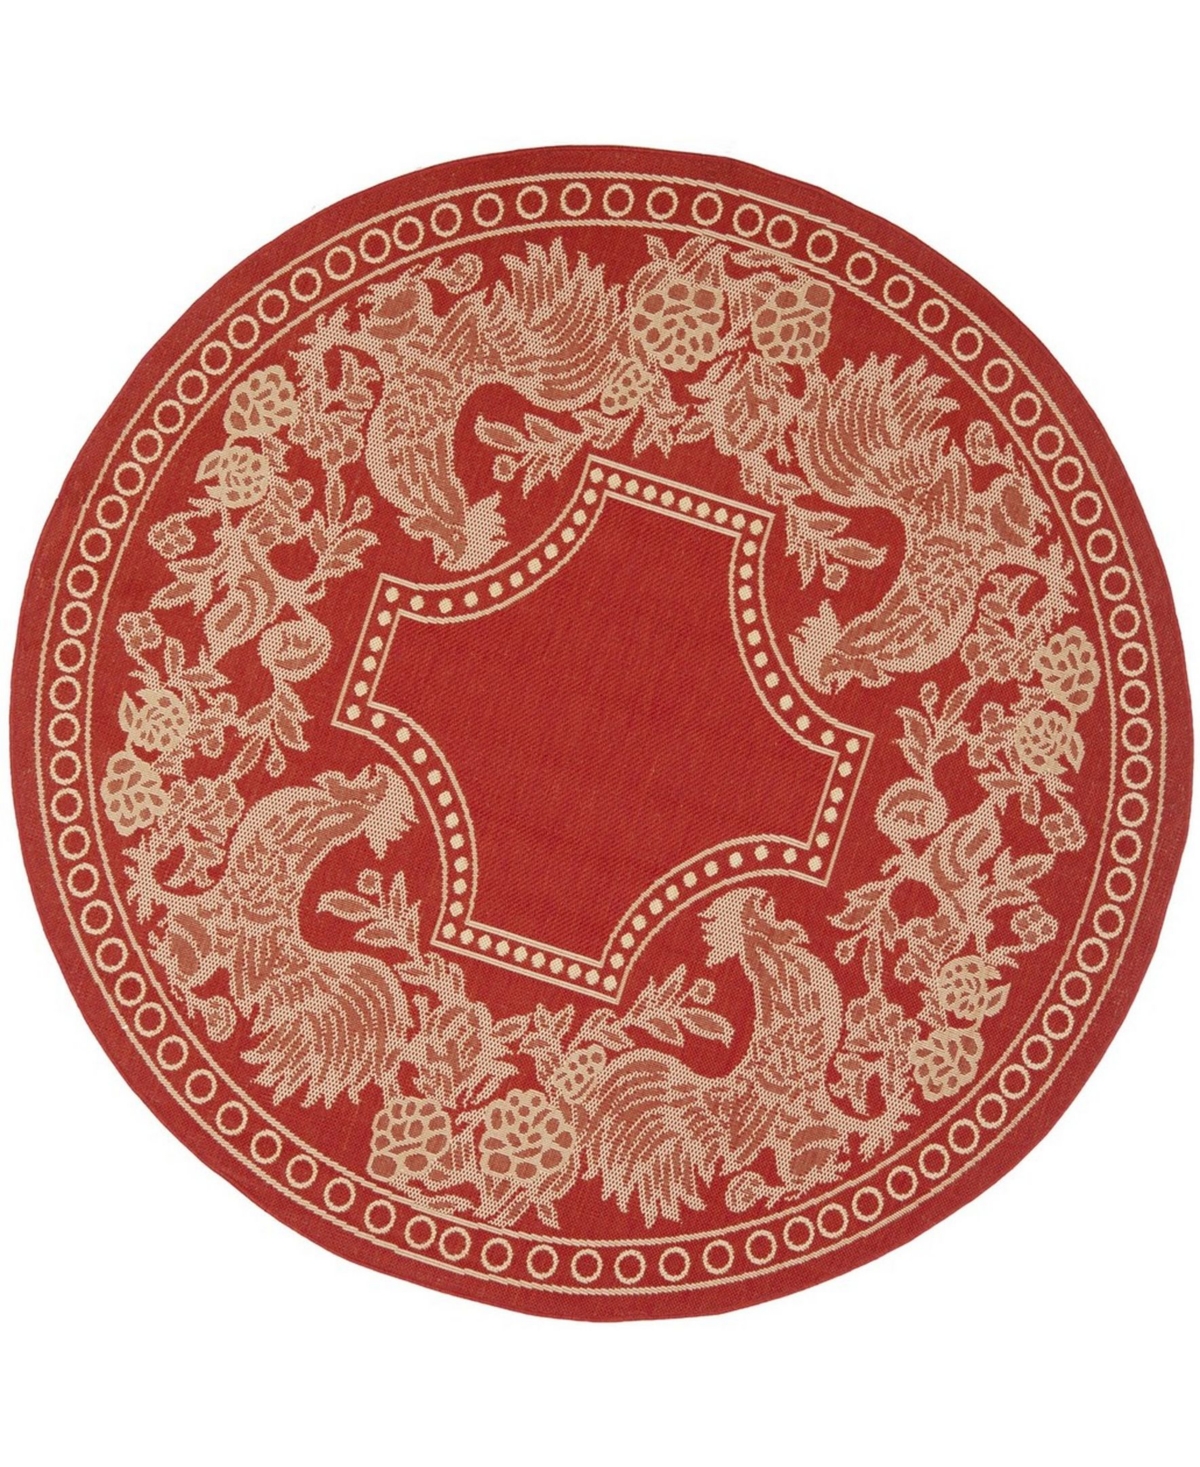 Safavieh Courtyard Cy3305 Red And Natural 5'3" X 5'3" Sisal Weave Round Outdoor Area Rug